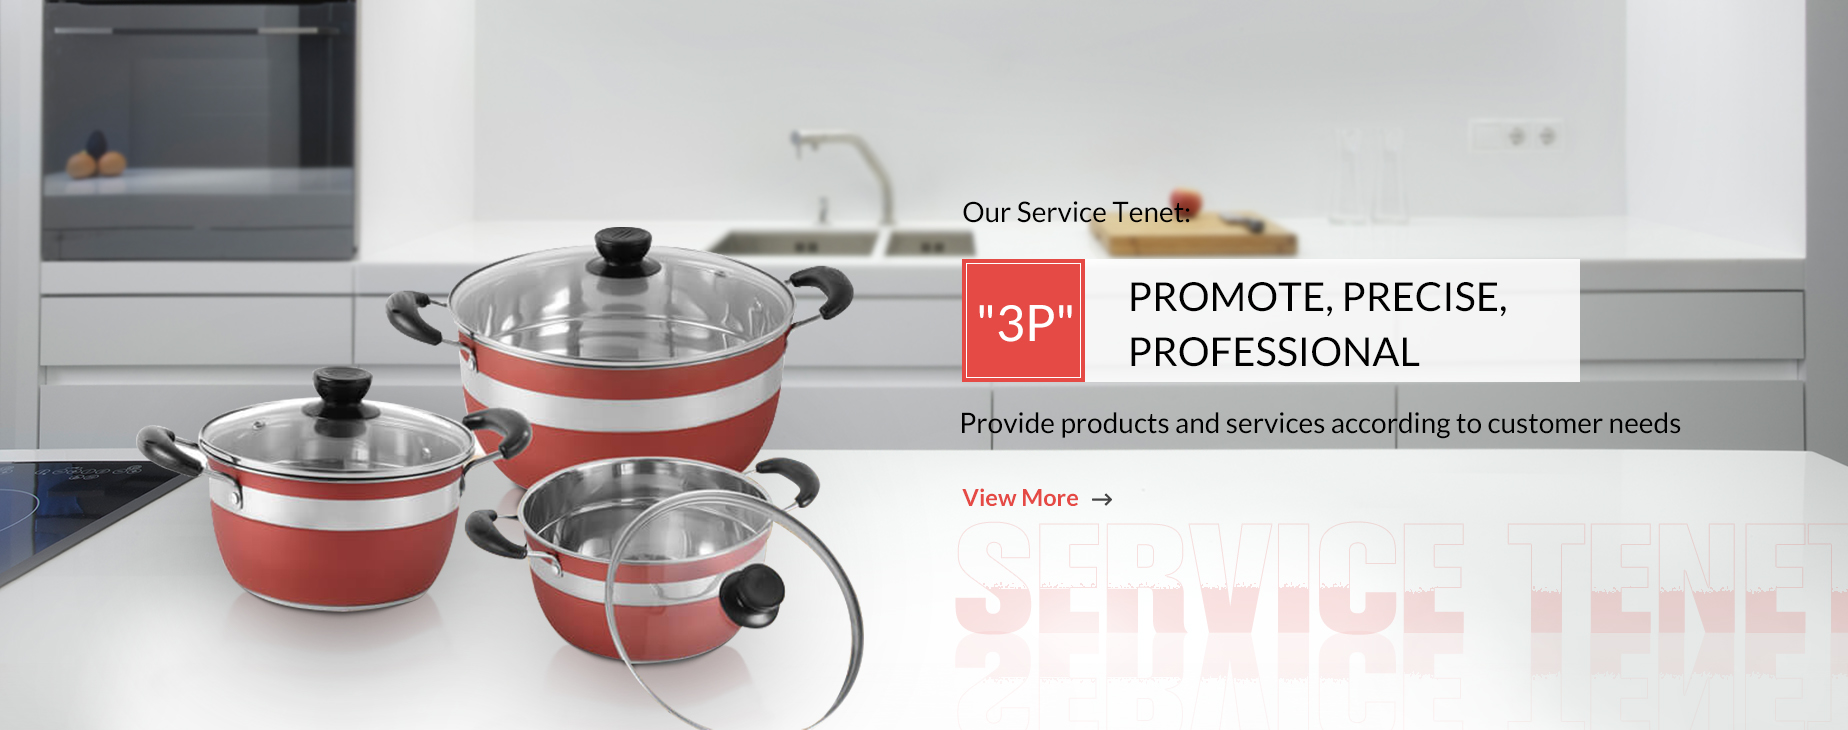 Kettle & Flask, Hotel Suppliers, Cookware Set - Happy Cooking